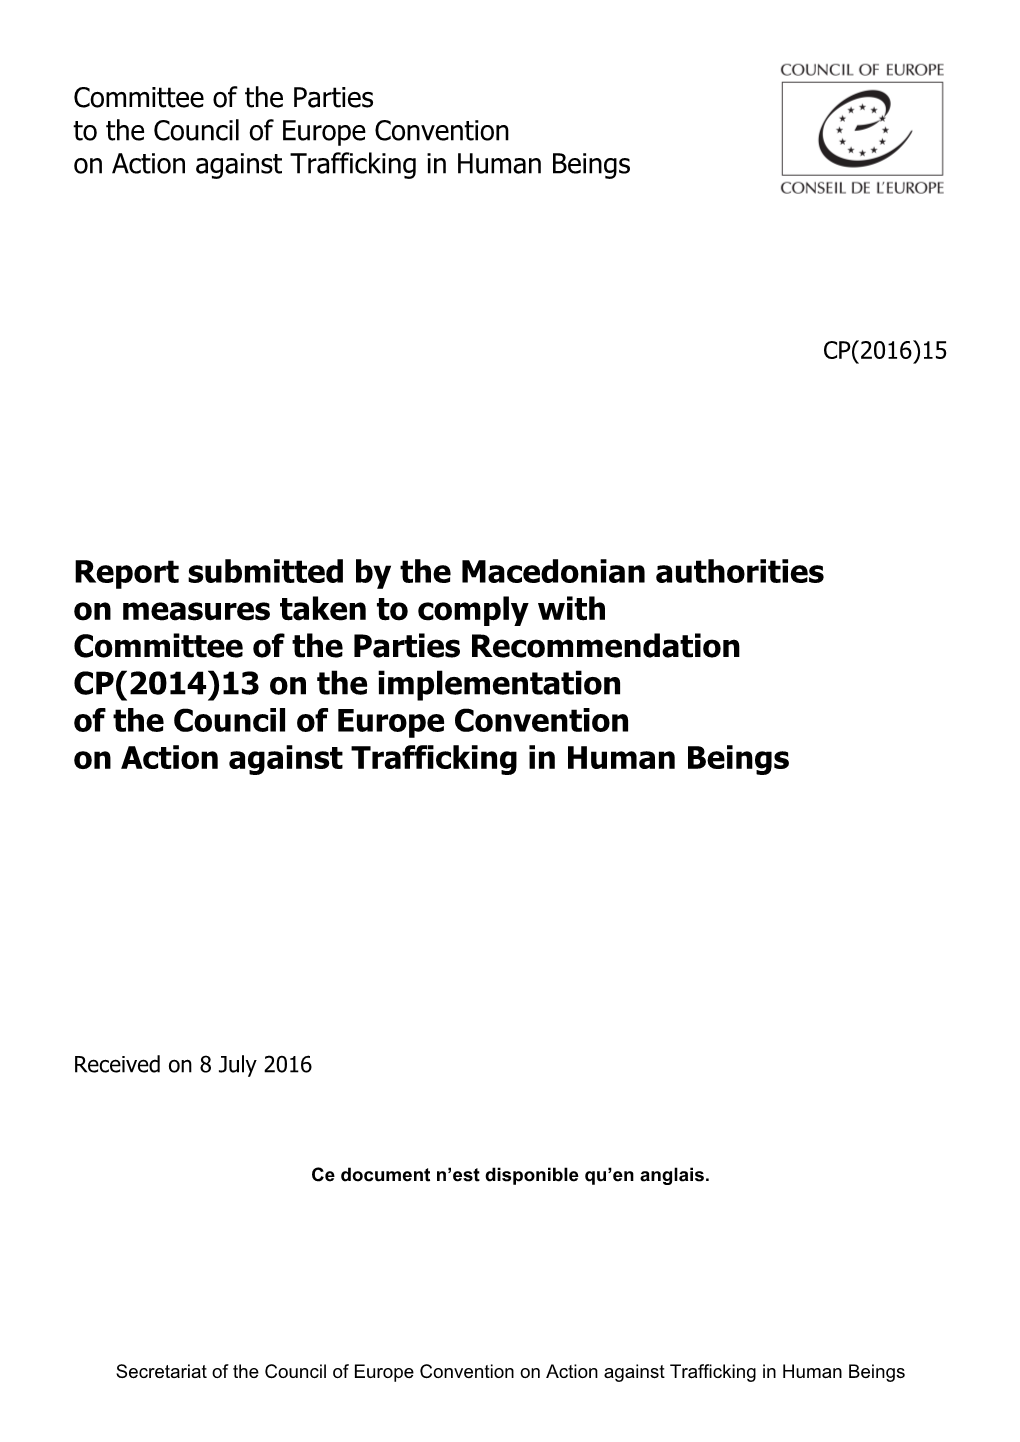 Report Submitted by the Macedonian Authorities on Measures